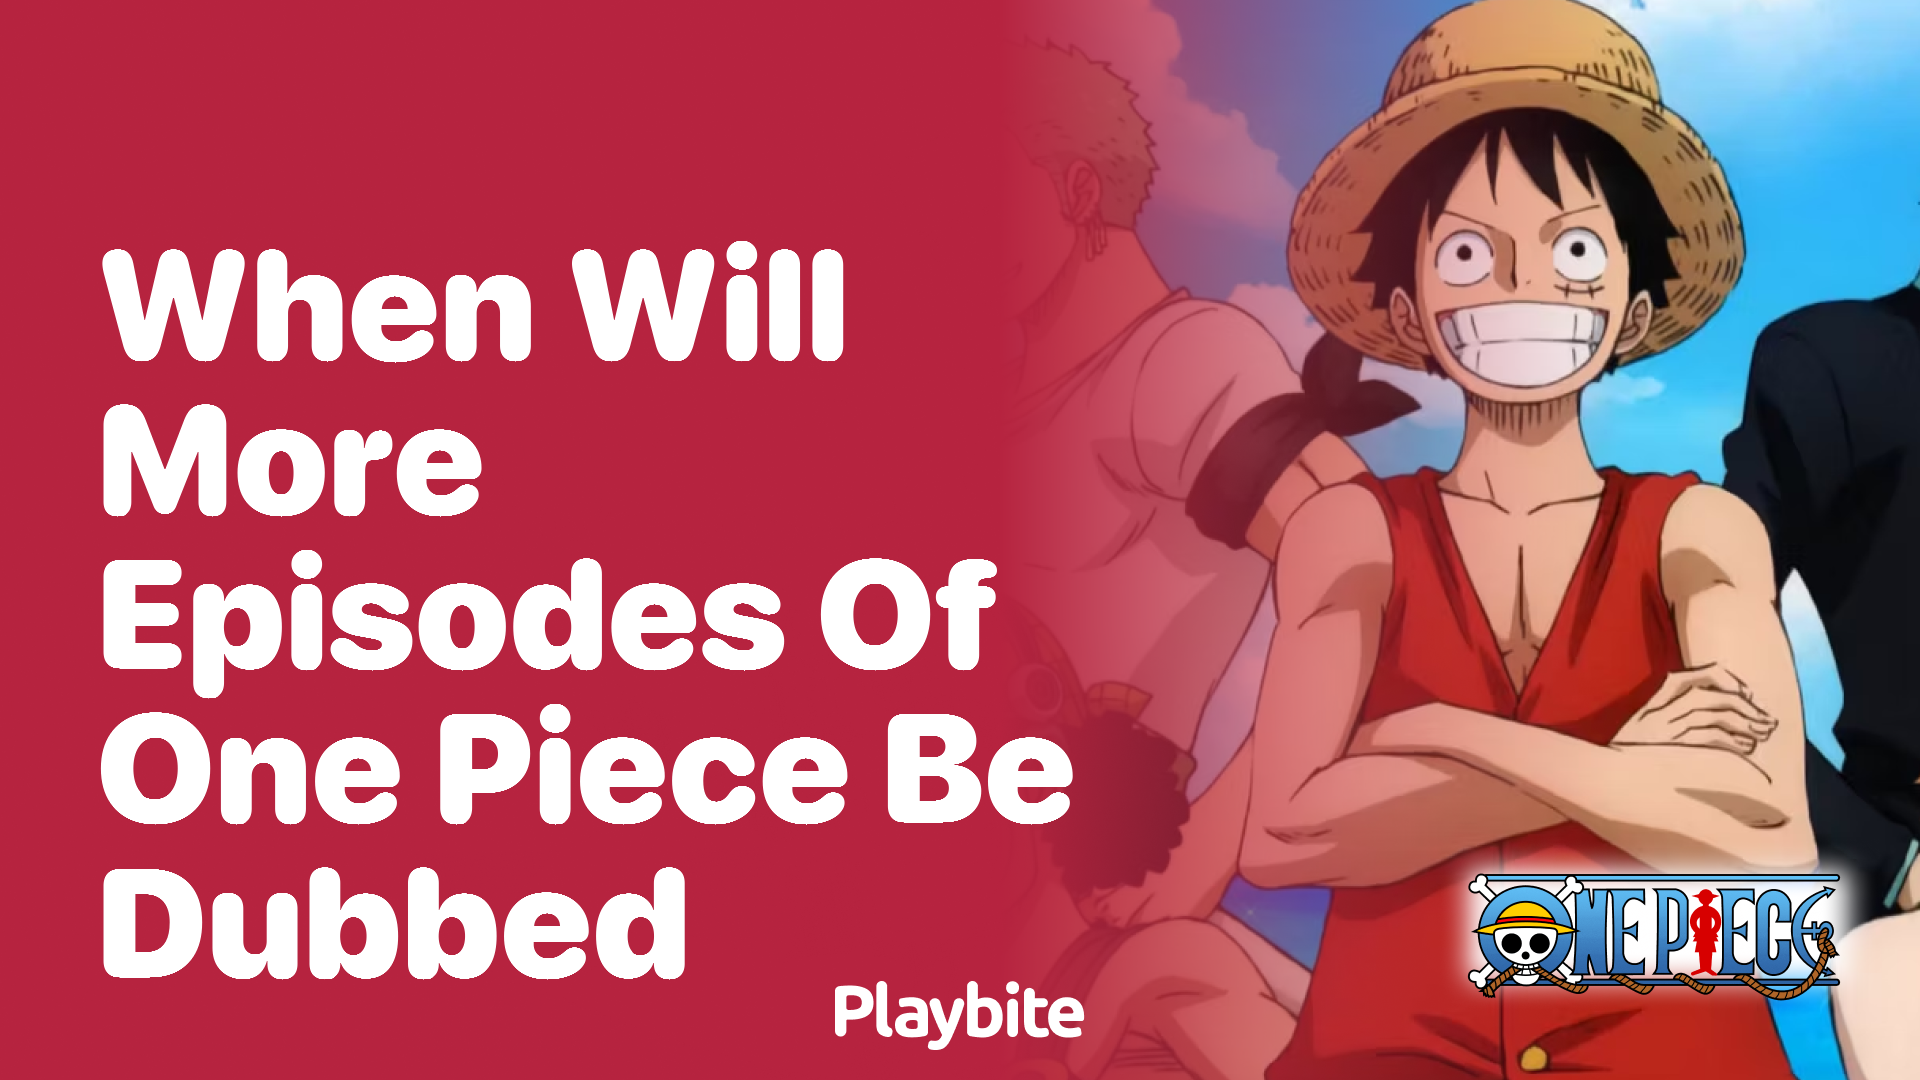 When Will More Episodes of One Piece Be Dubbed?